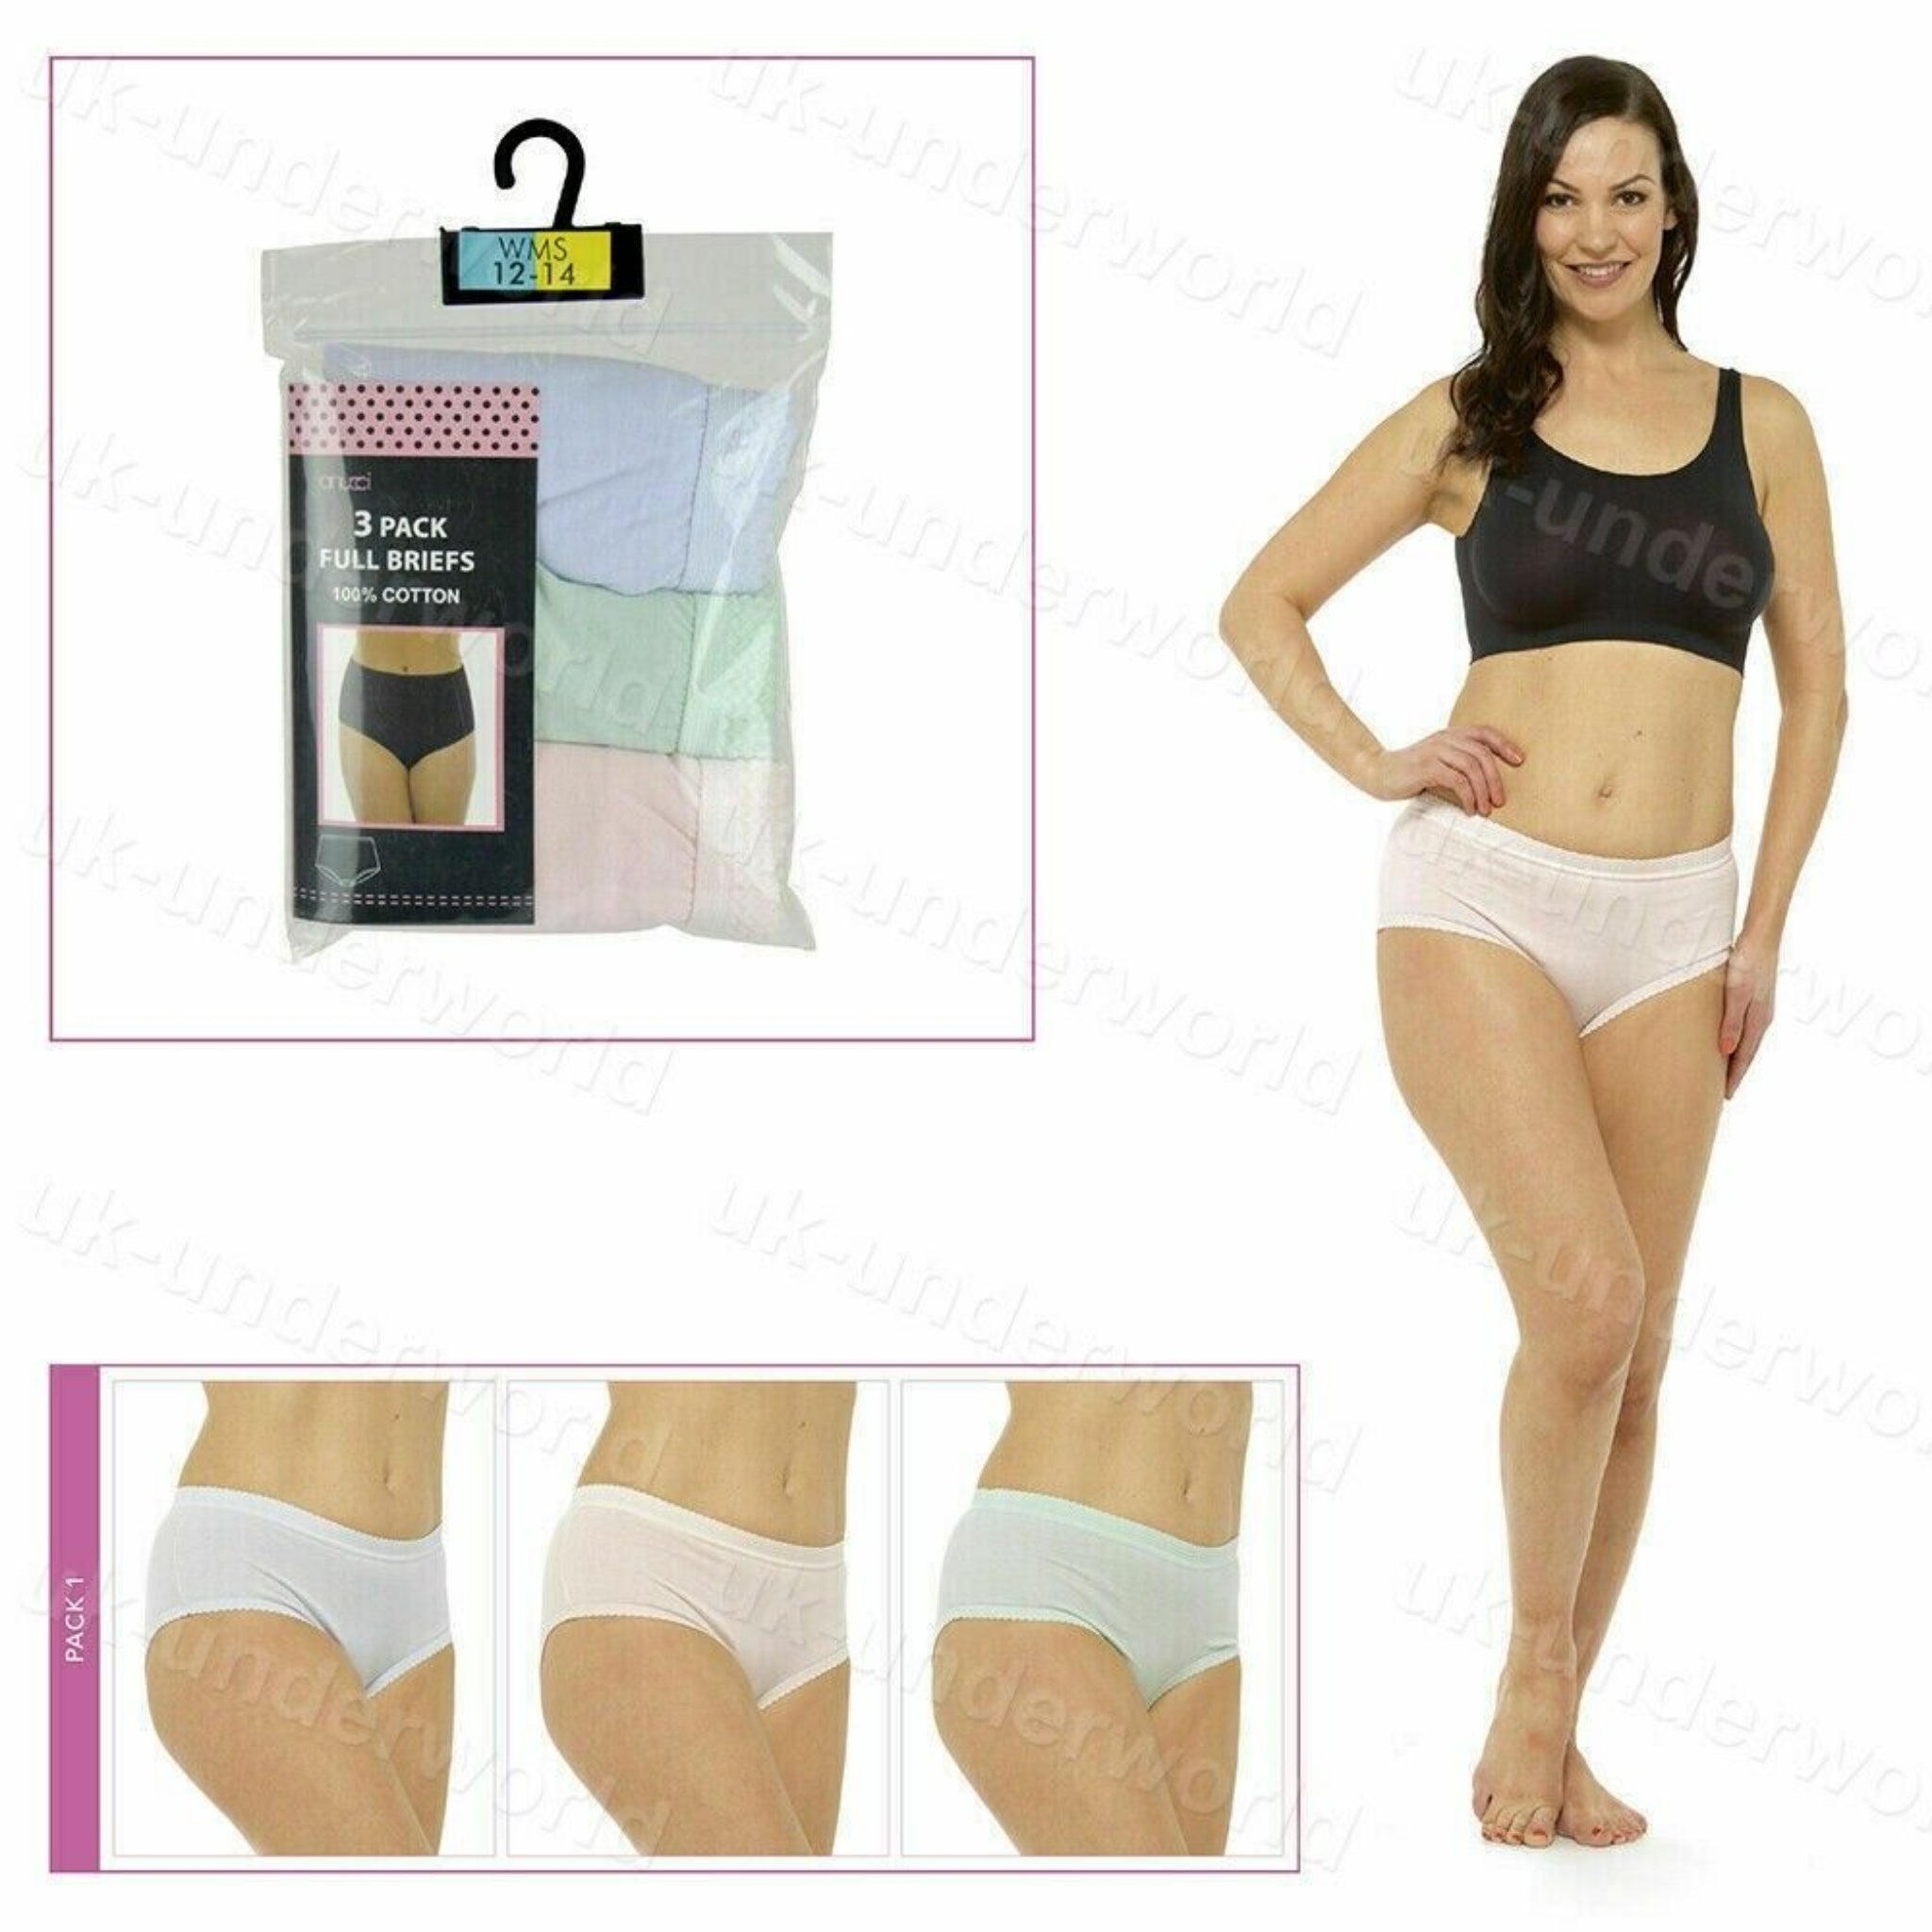 Ladies Maxi Full Briefs Knickers Womens Adults Plain Cotton Pants 3 Pairs